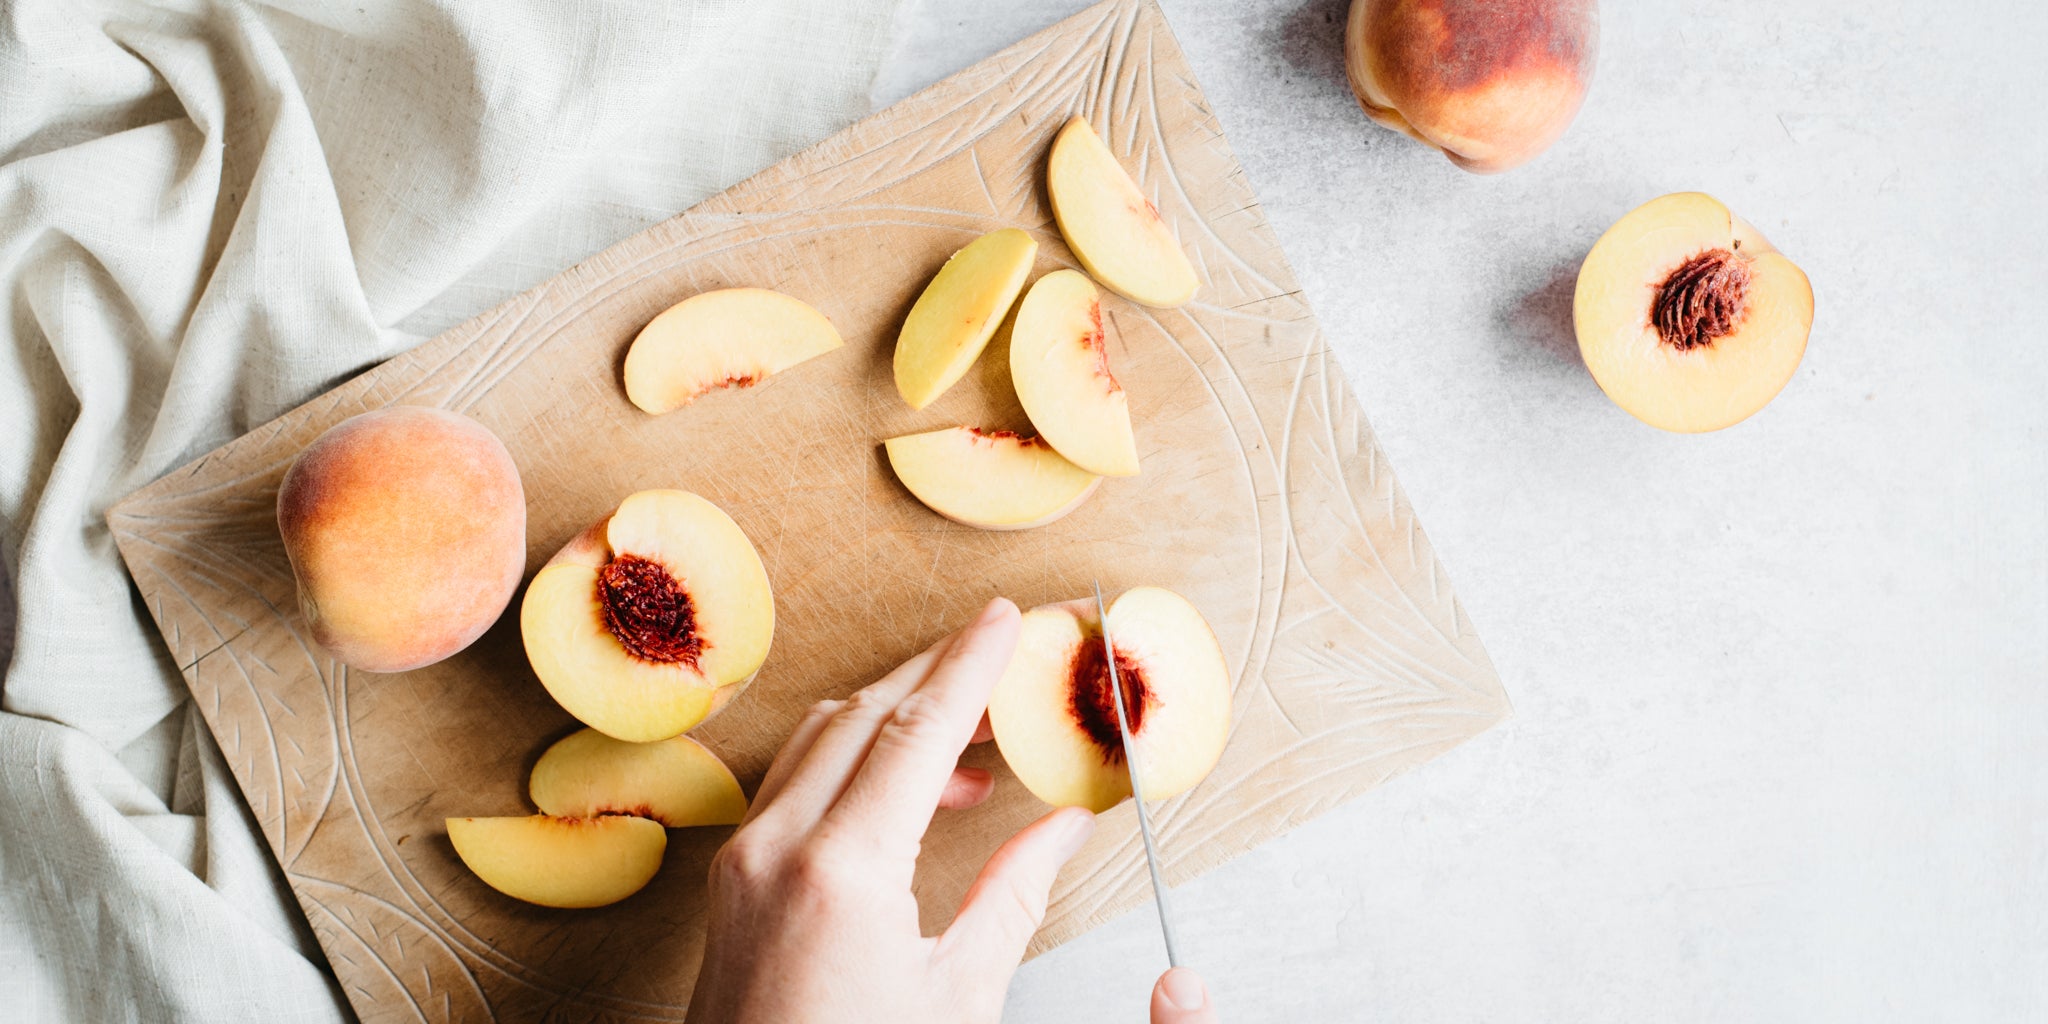 Peaches being chopped on a wooden chopping board